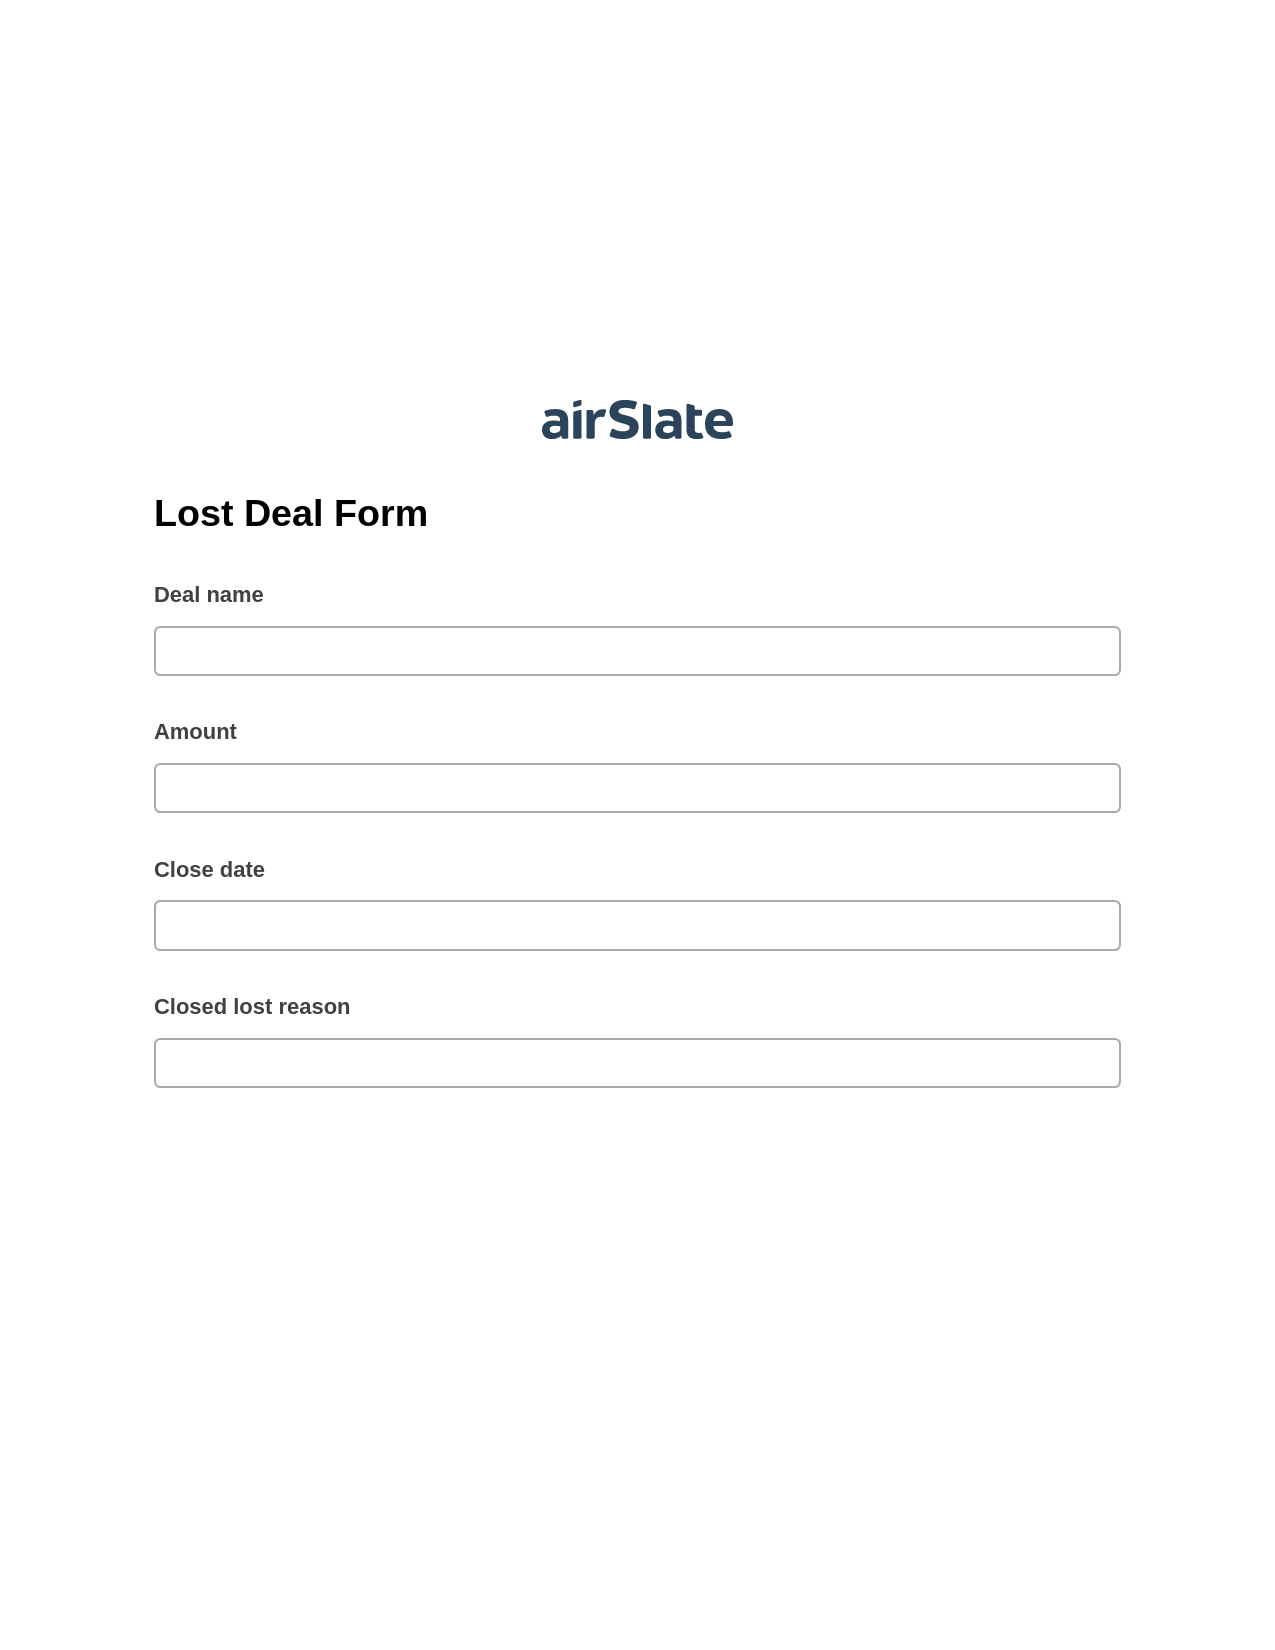 Lost Deal Form Pre-fill from Salesforce Records with SOQL Bot, Update Salesforce Records Bot, Archive to SharePoint Folder Bot